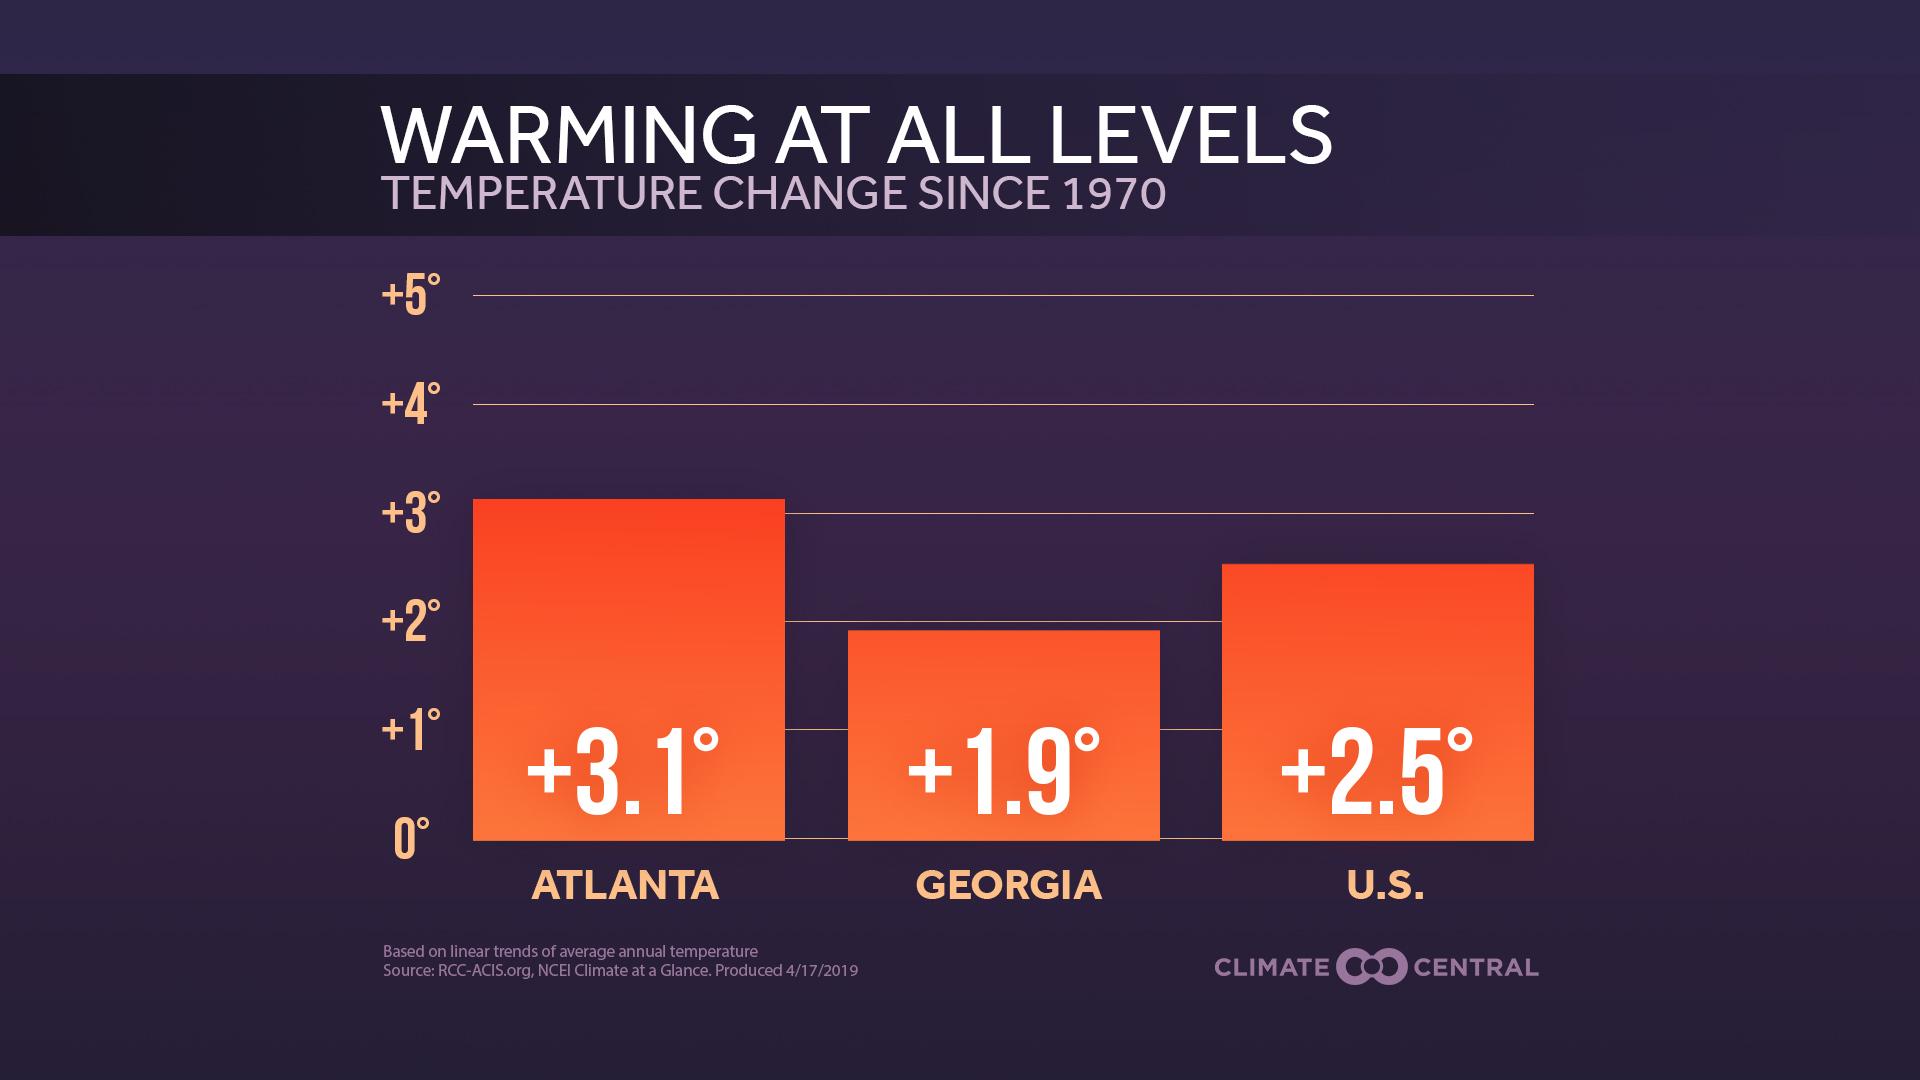 Market - Earth Day: Fastest Warming Cities and States